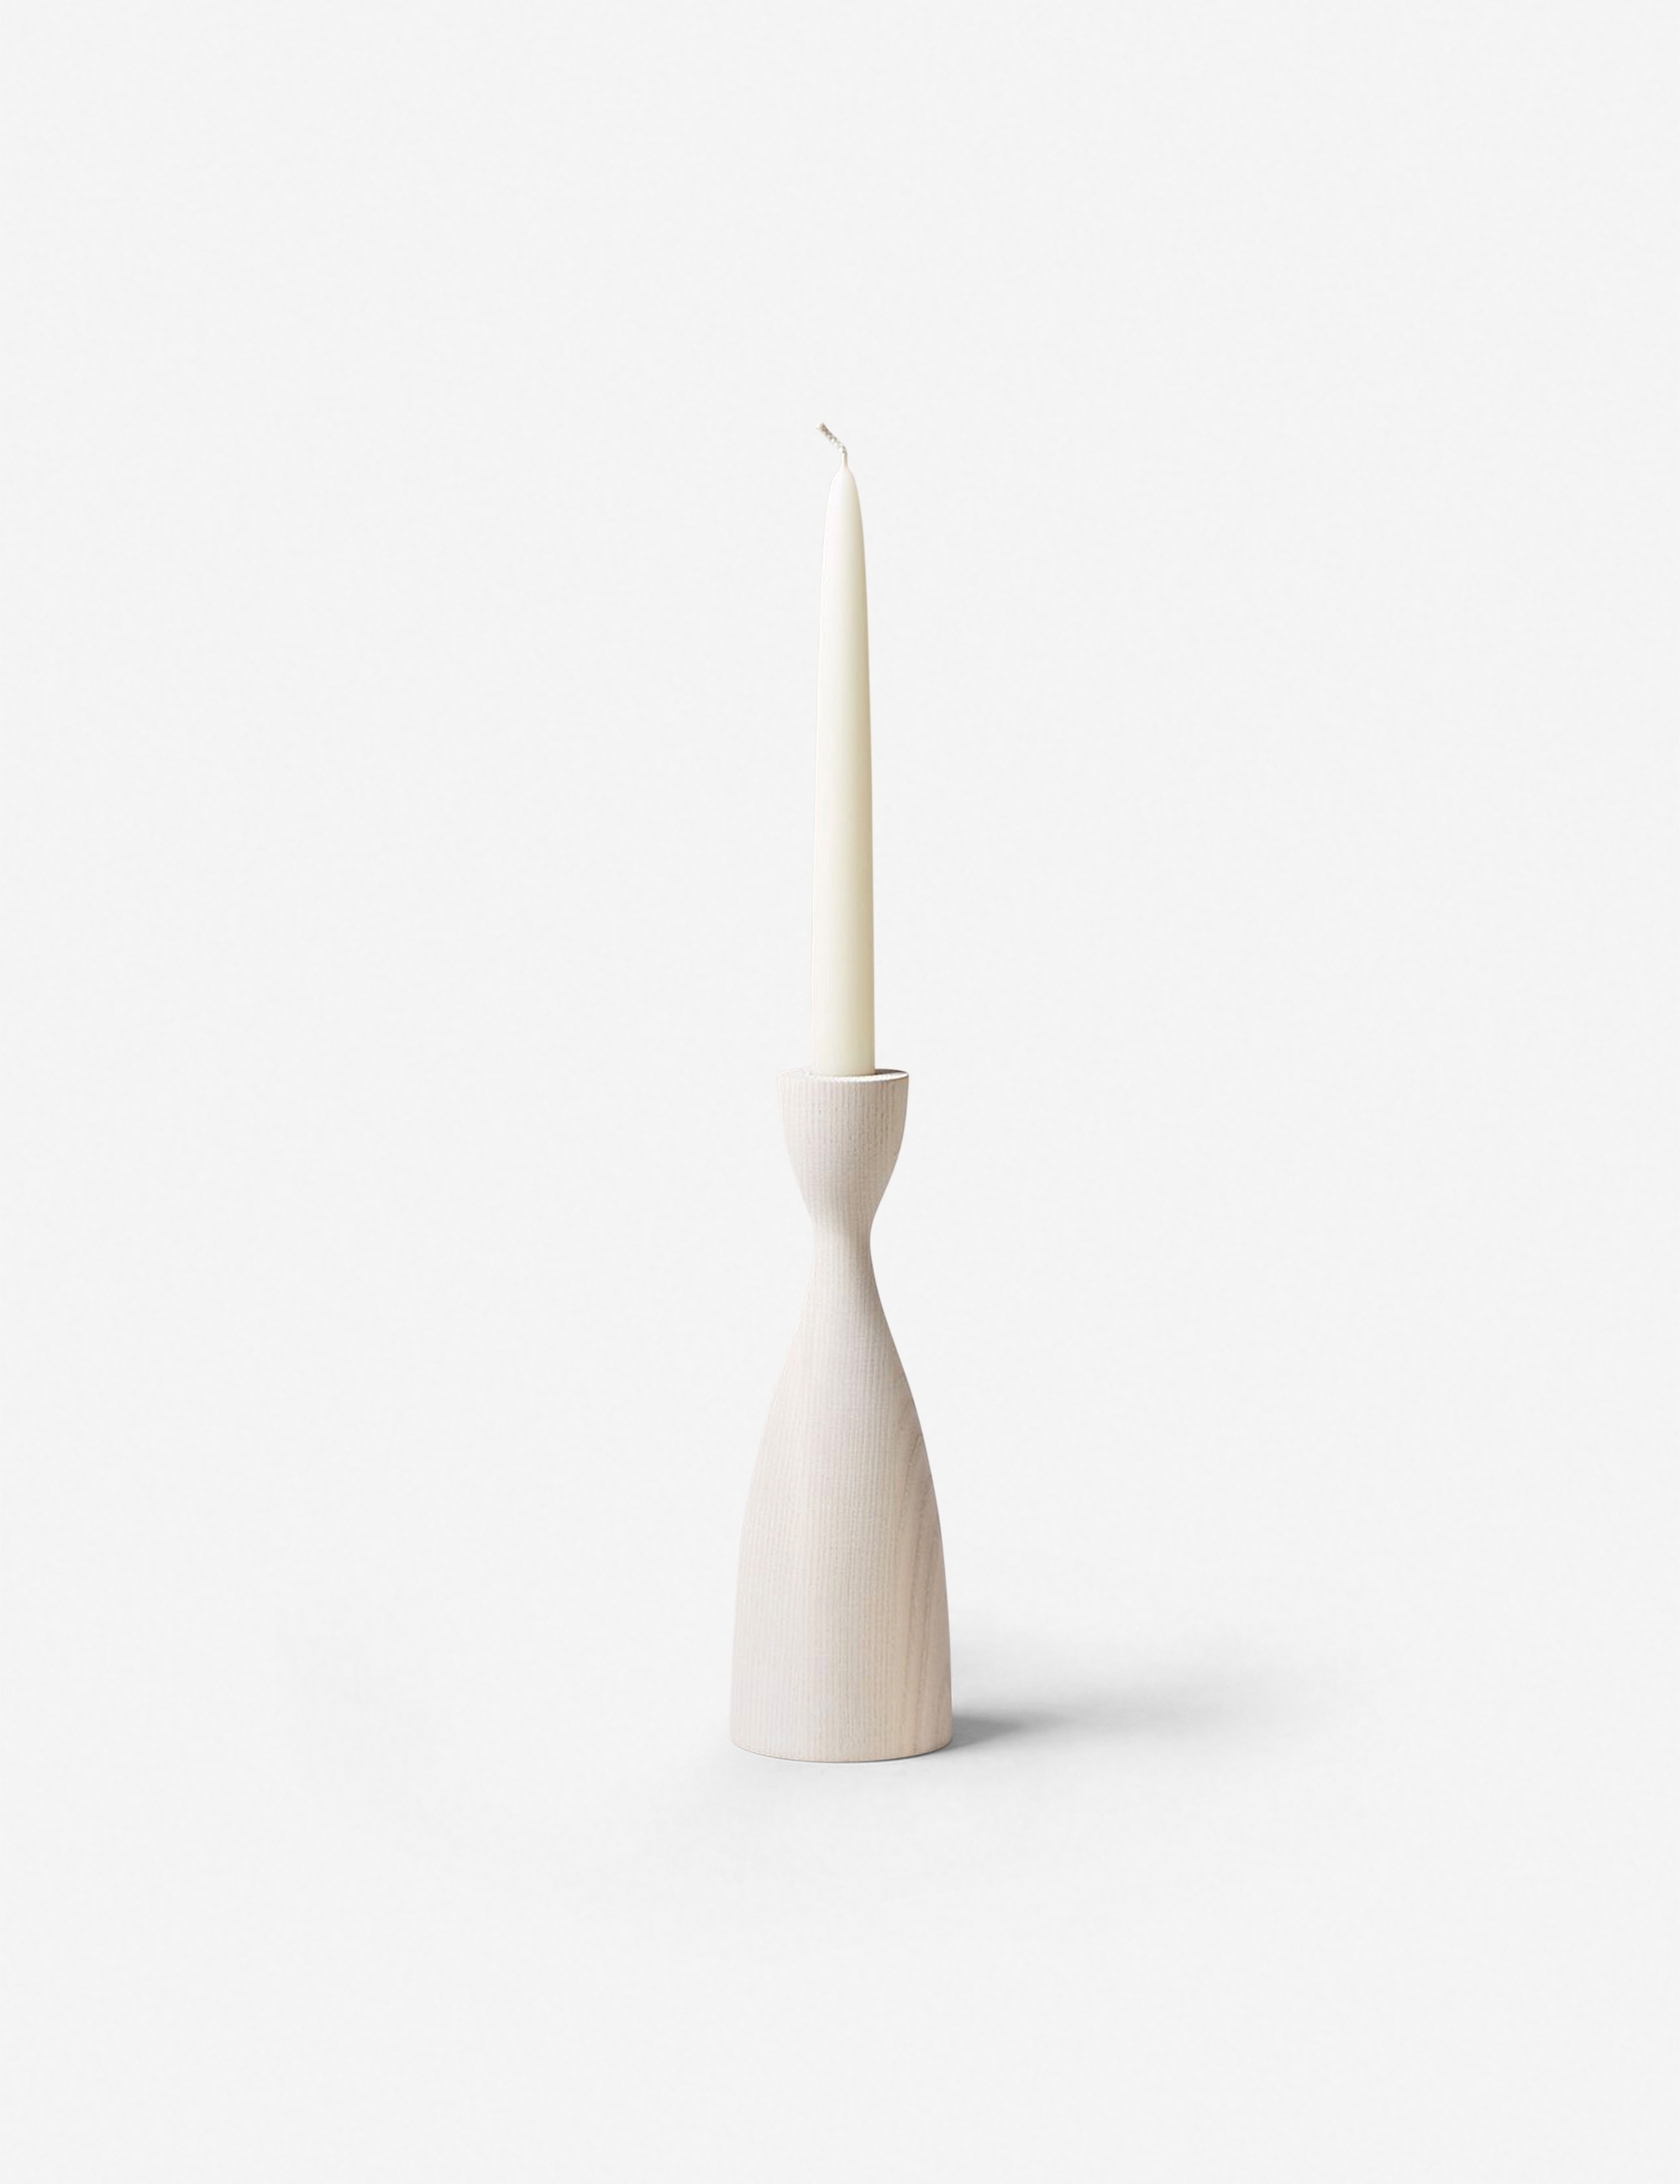 Pantry Candlestick by Farmhouse Pottery - Image 0